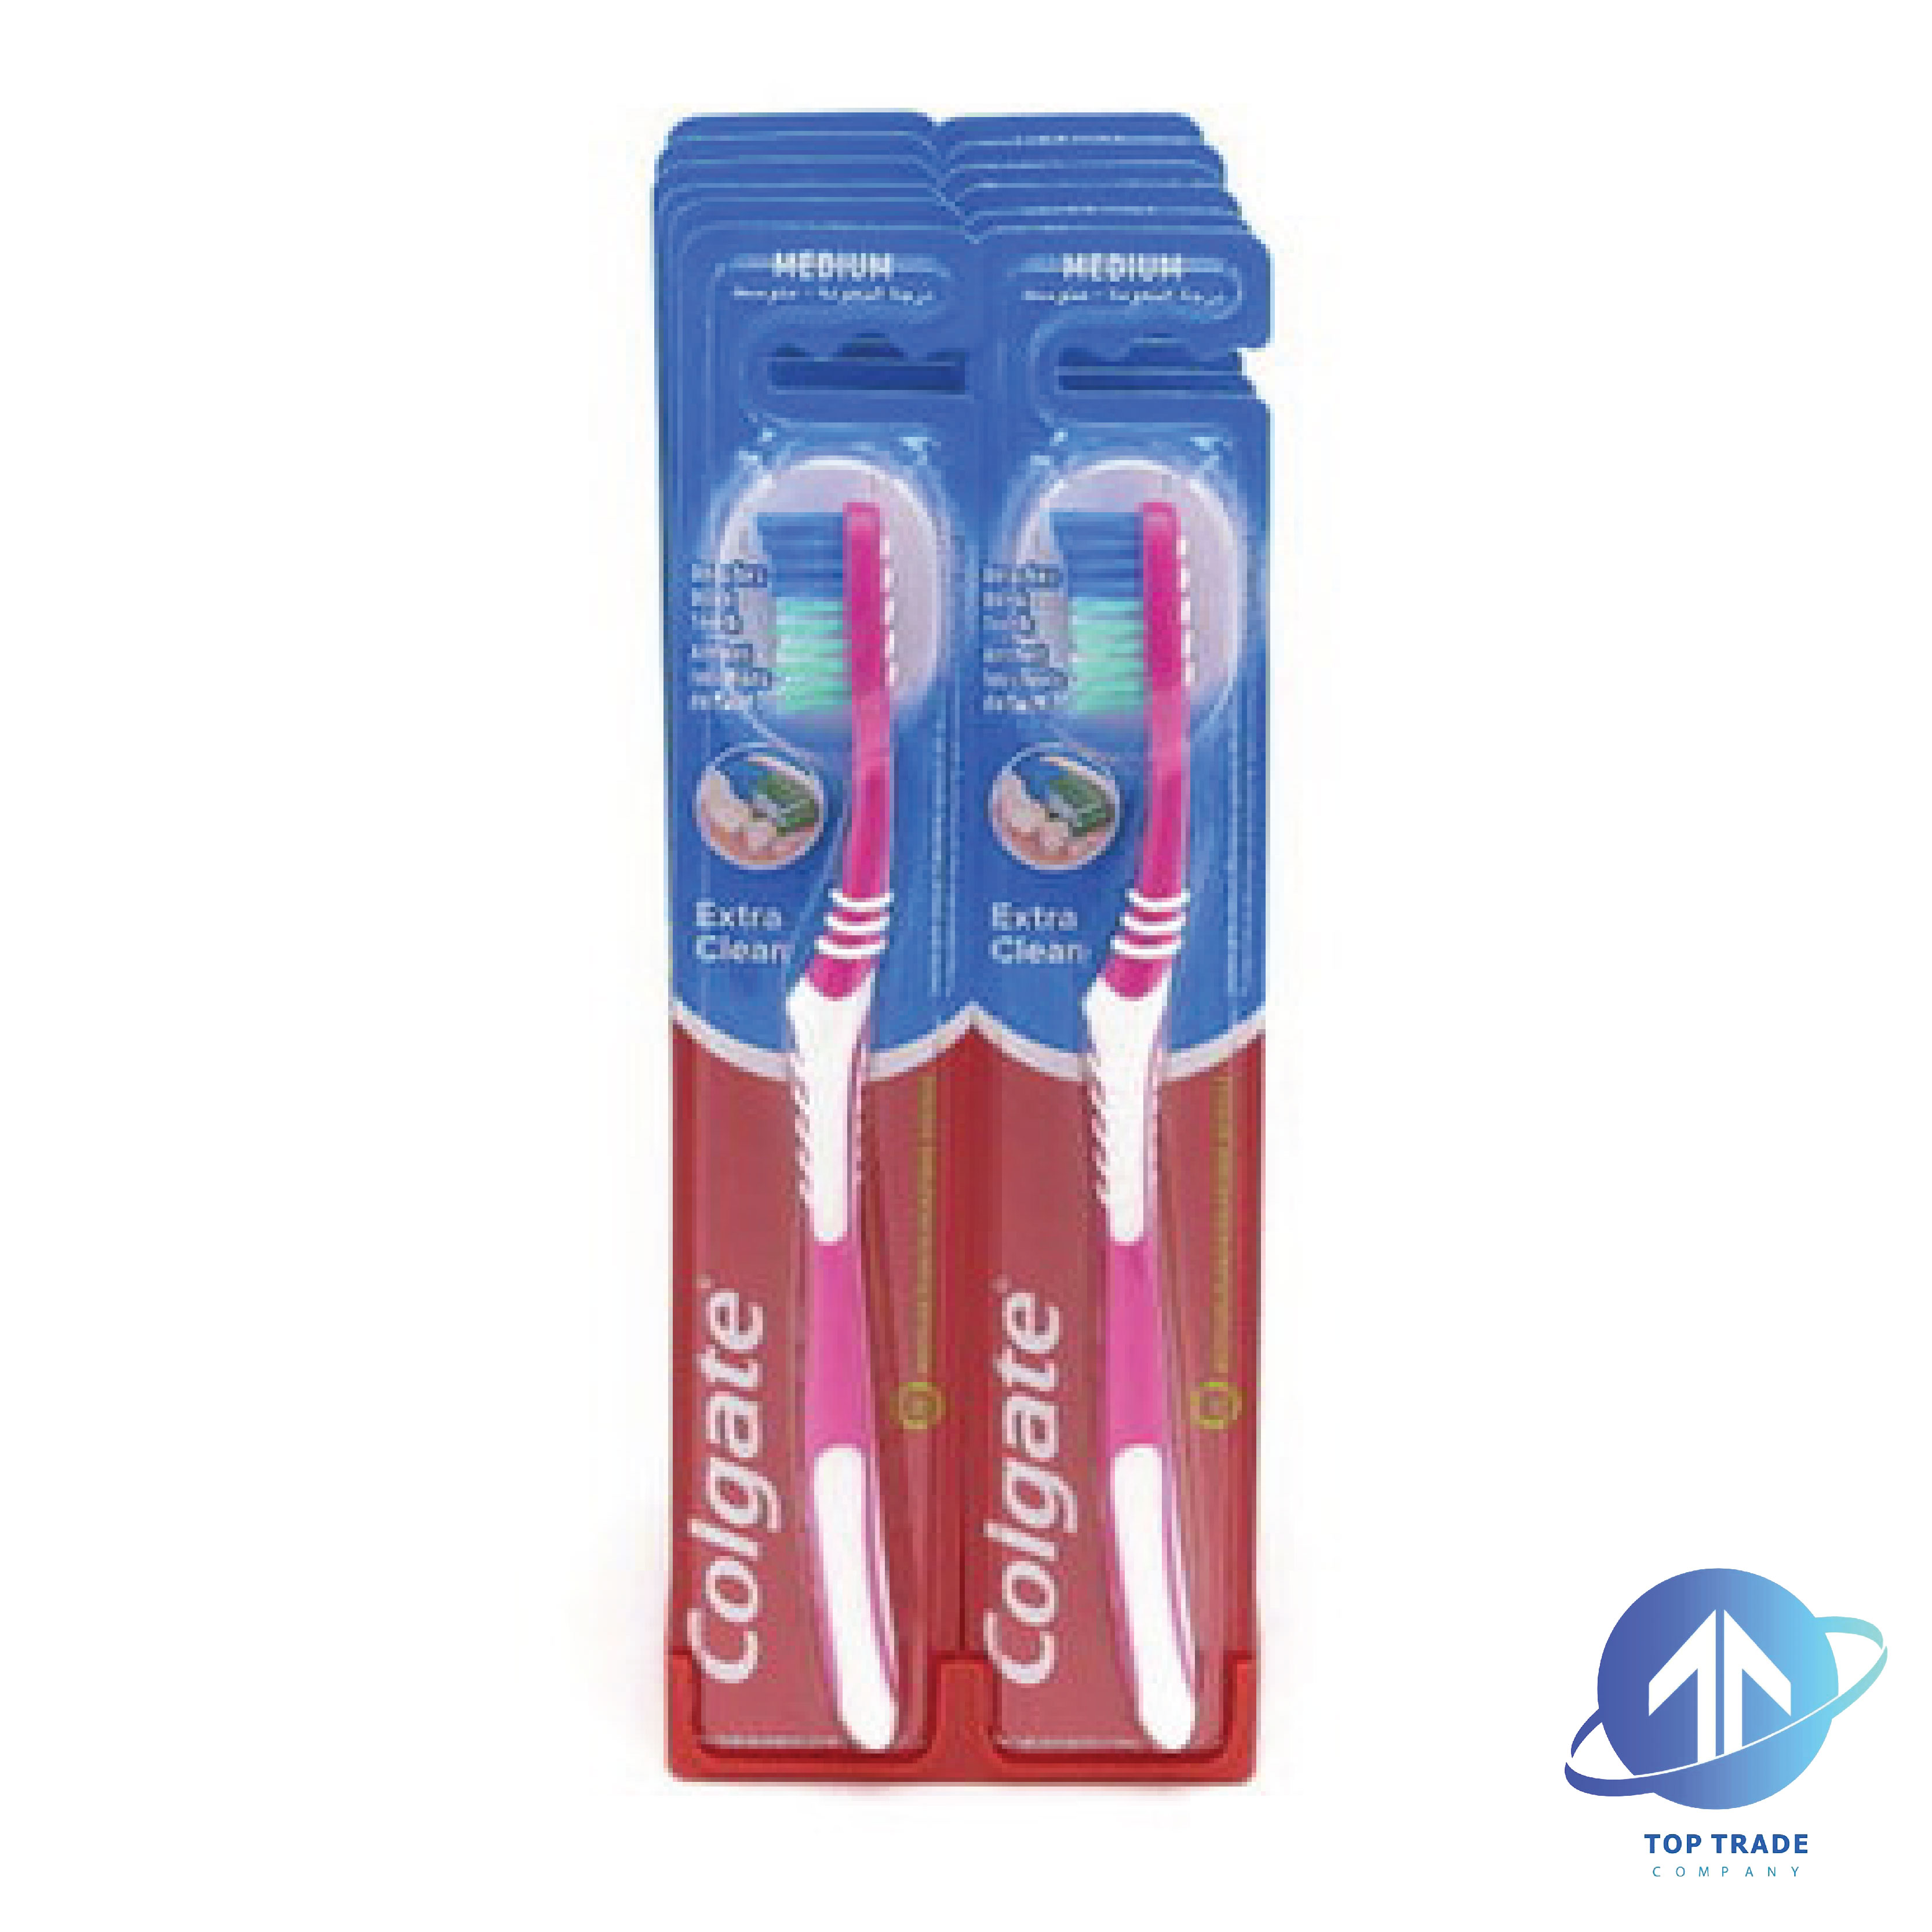 Colgate toothbrush Extra Clean